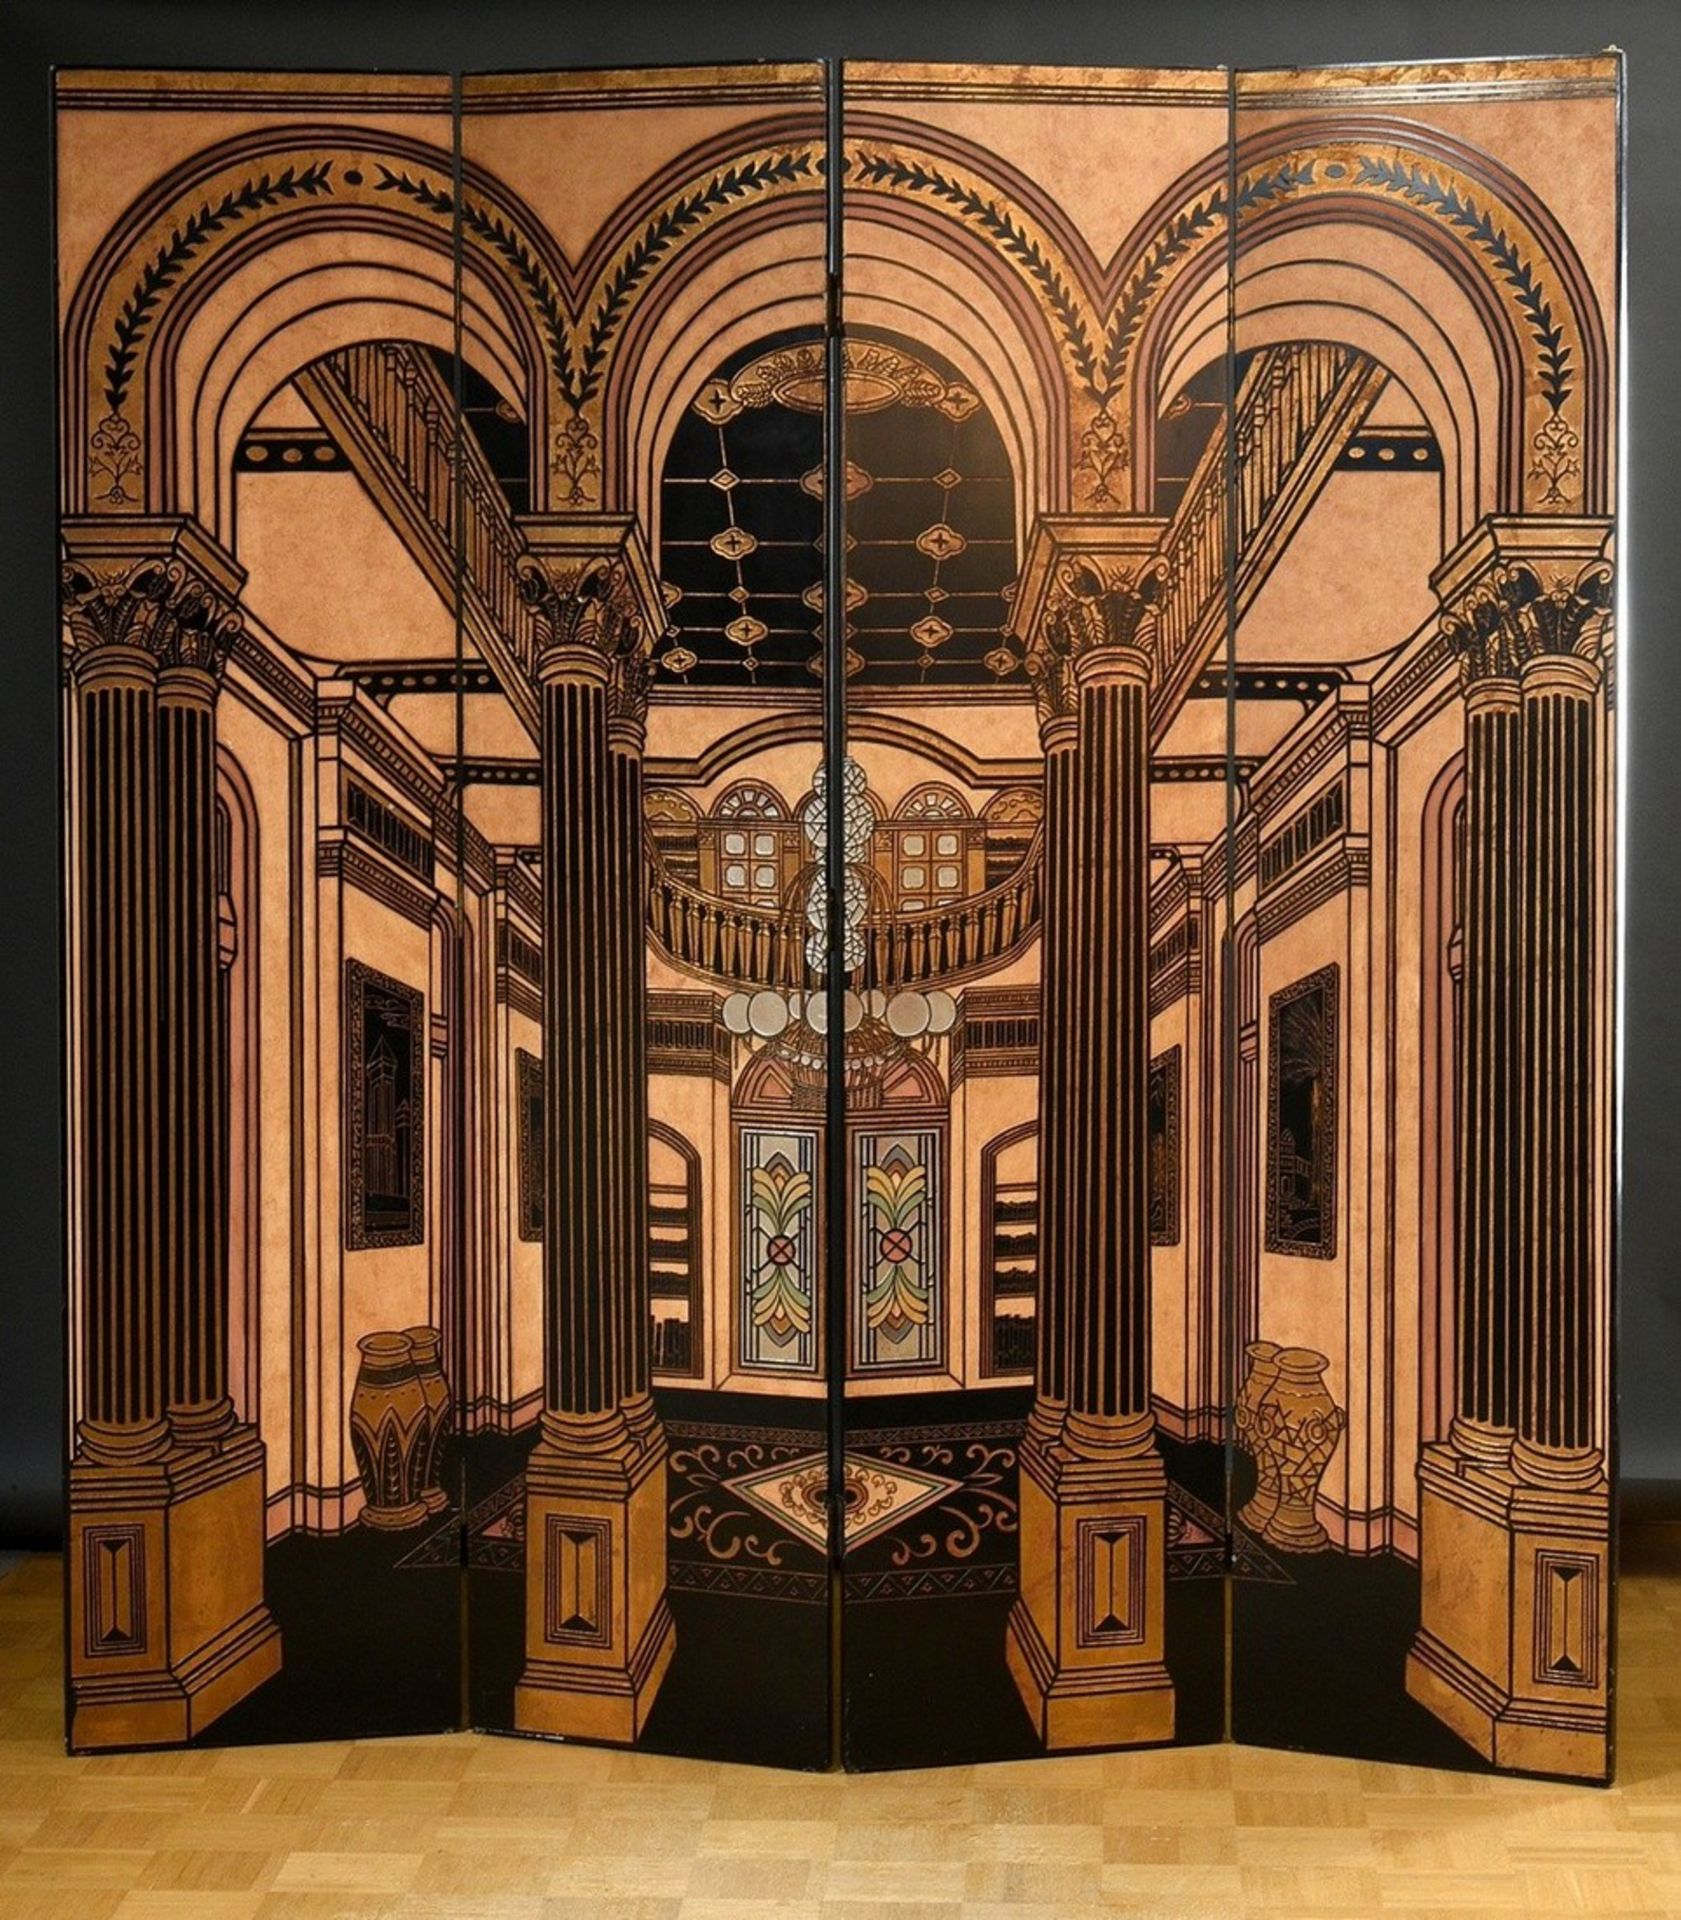 Four-part lacquer screen in Art Deco style with "interior depiction", wood relief set and gilded, 2